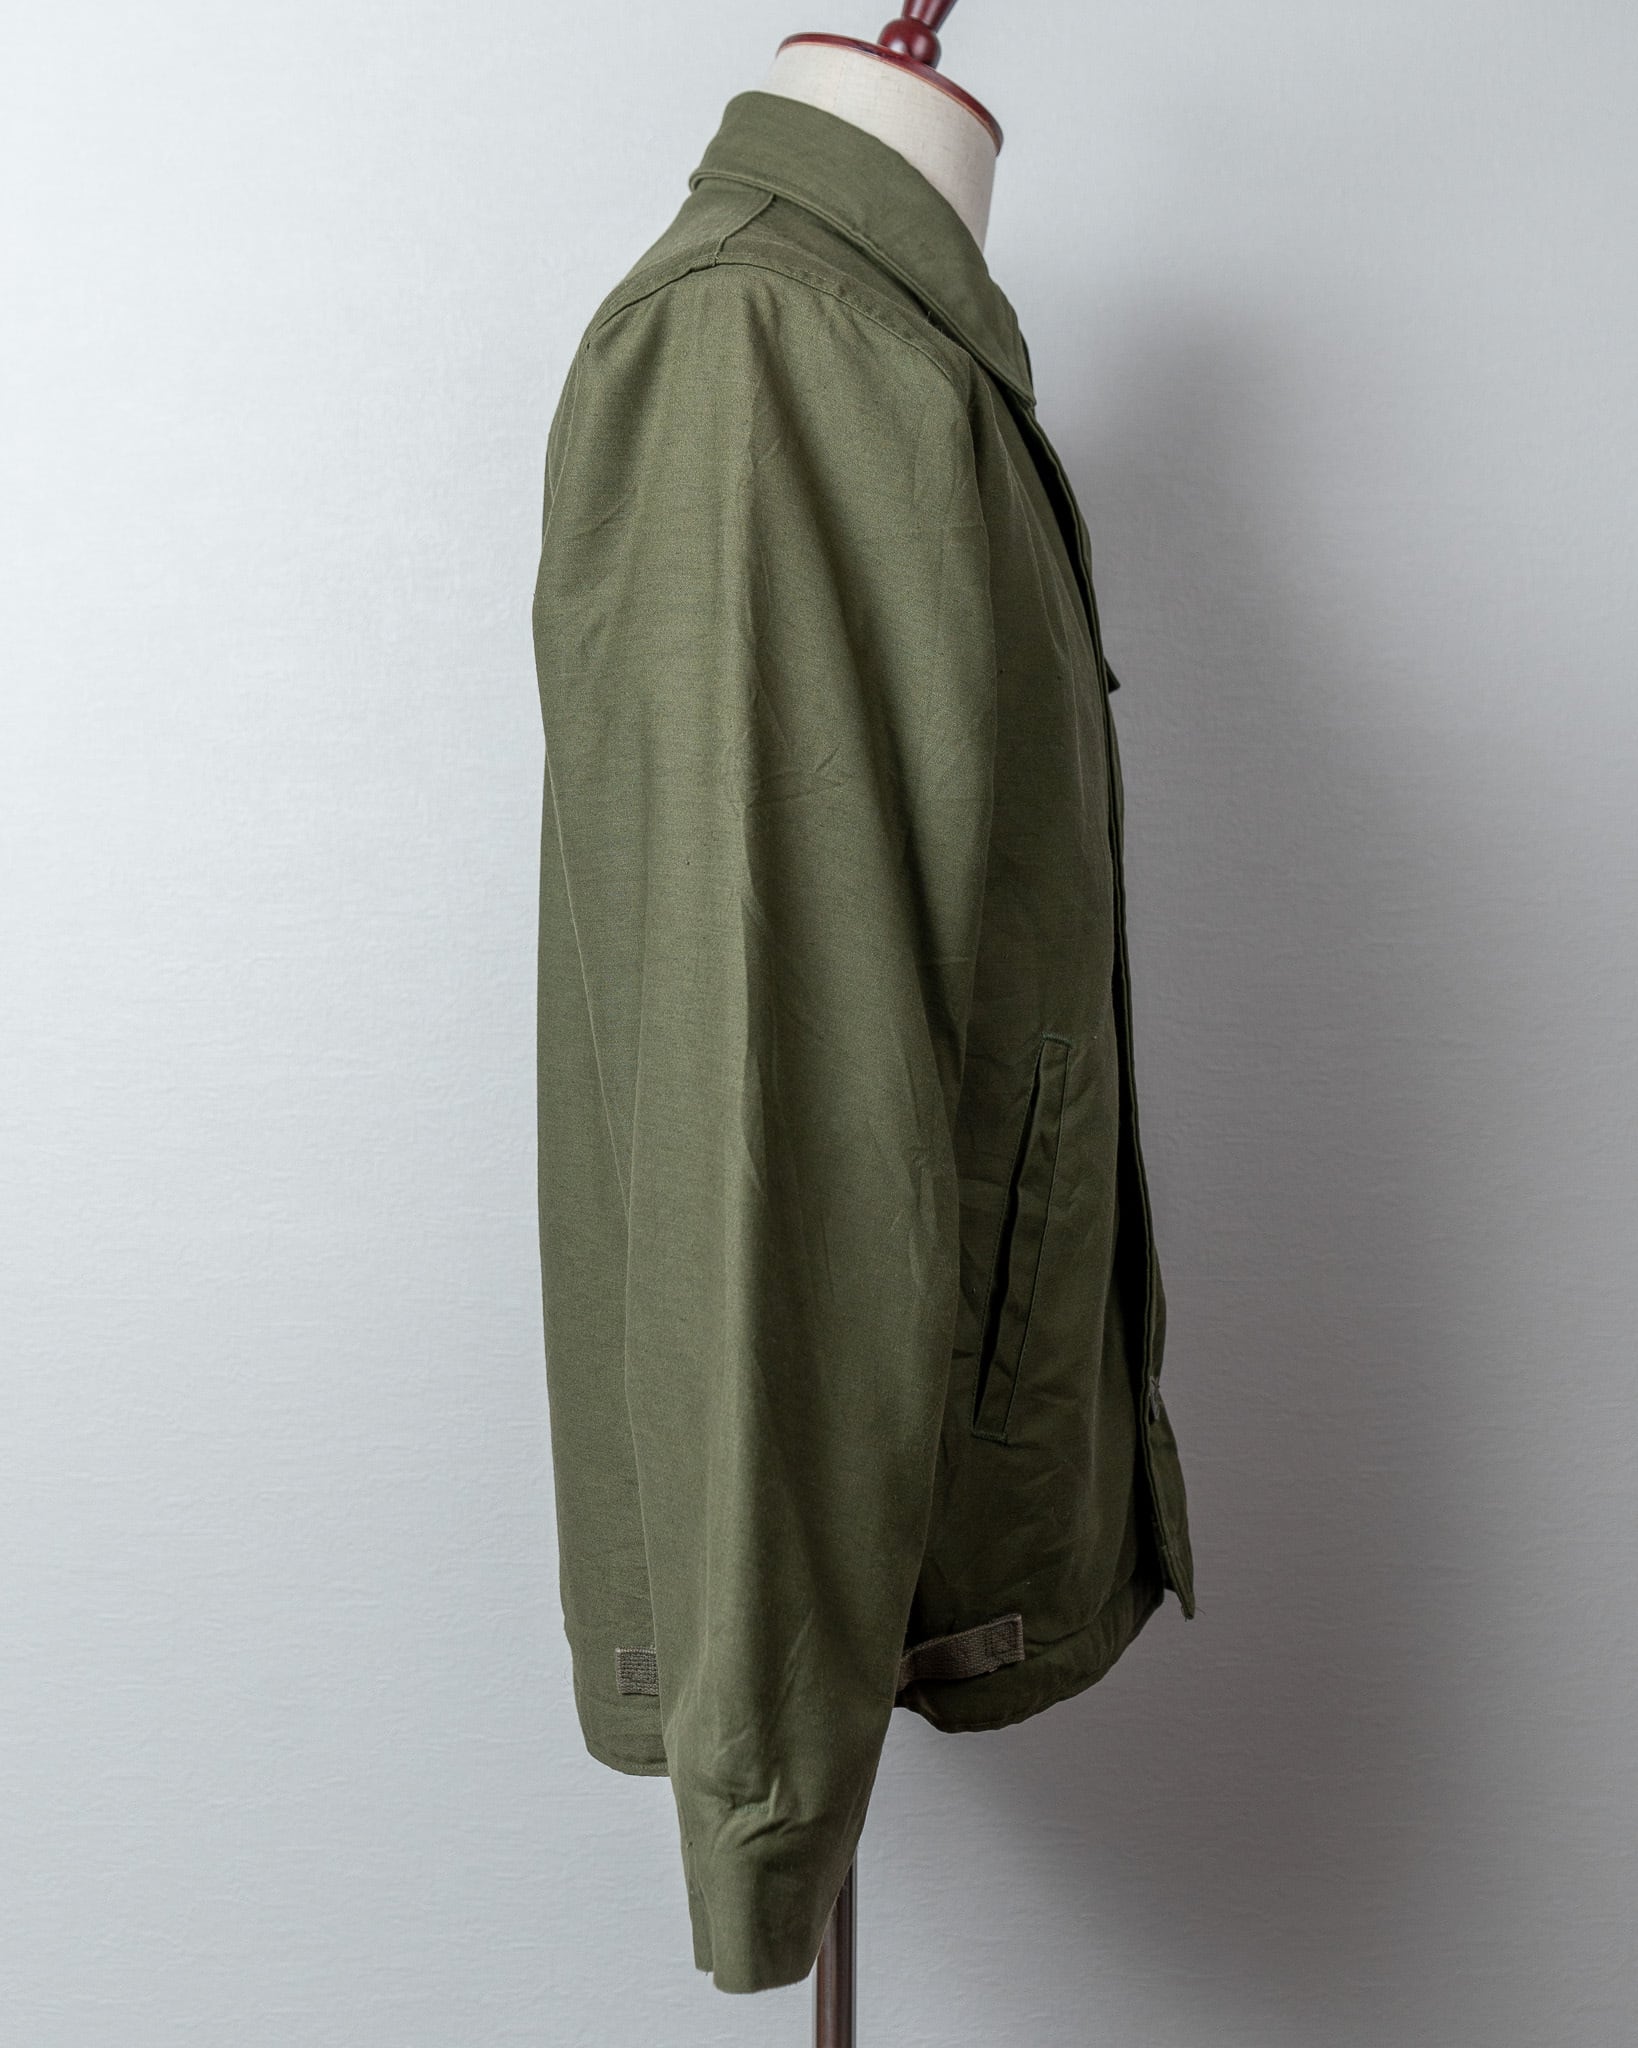 【DEADSTOCK】U.S.Navy A-2 Deck Jacket Small 実物 アメリカ海軍 A-2デッキジャケット S デッドストック  No.920 | FAR EAST SIGNAL powered by BASE